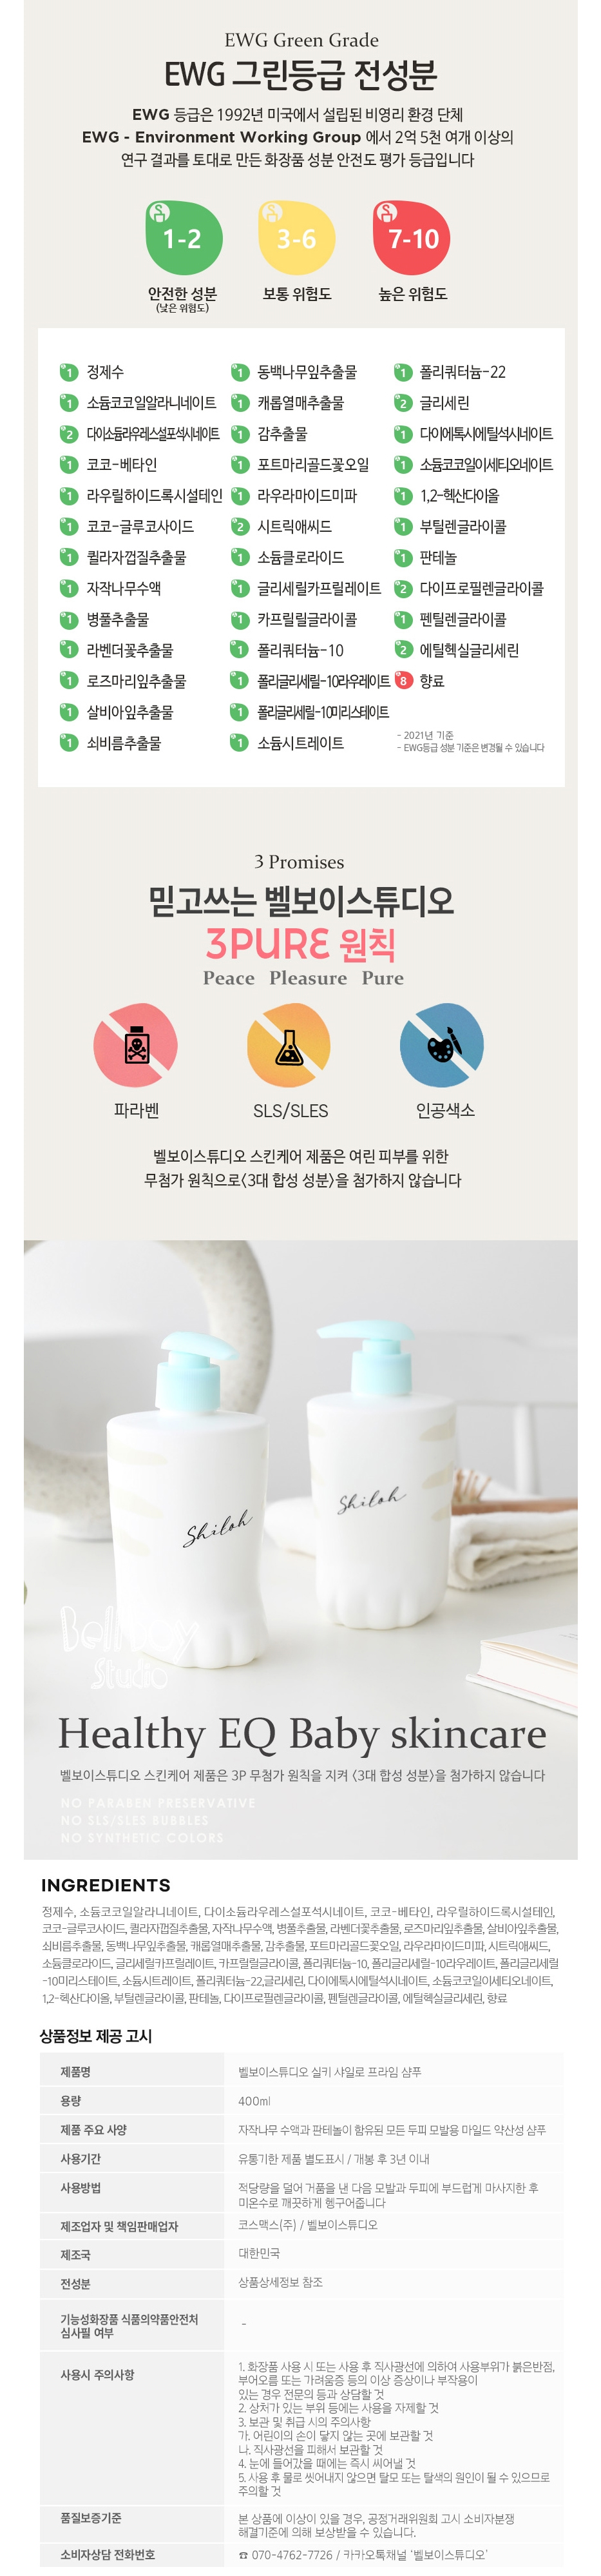 Cosmetic product image-S1L4